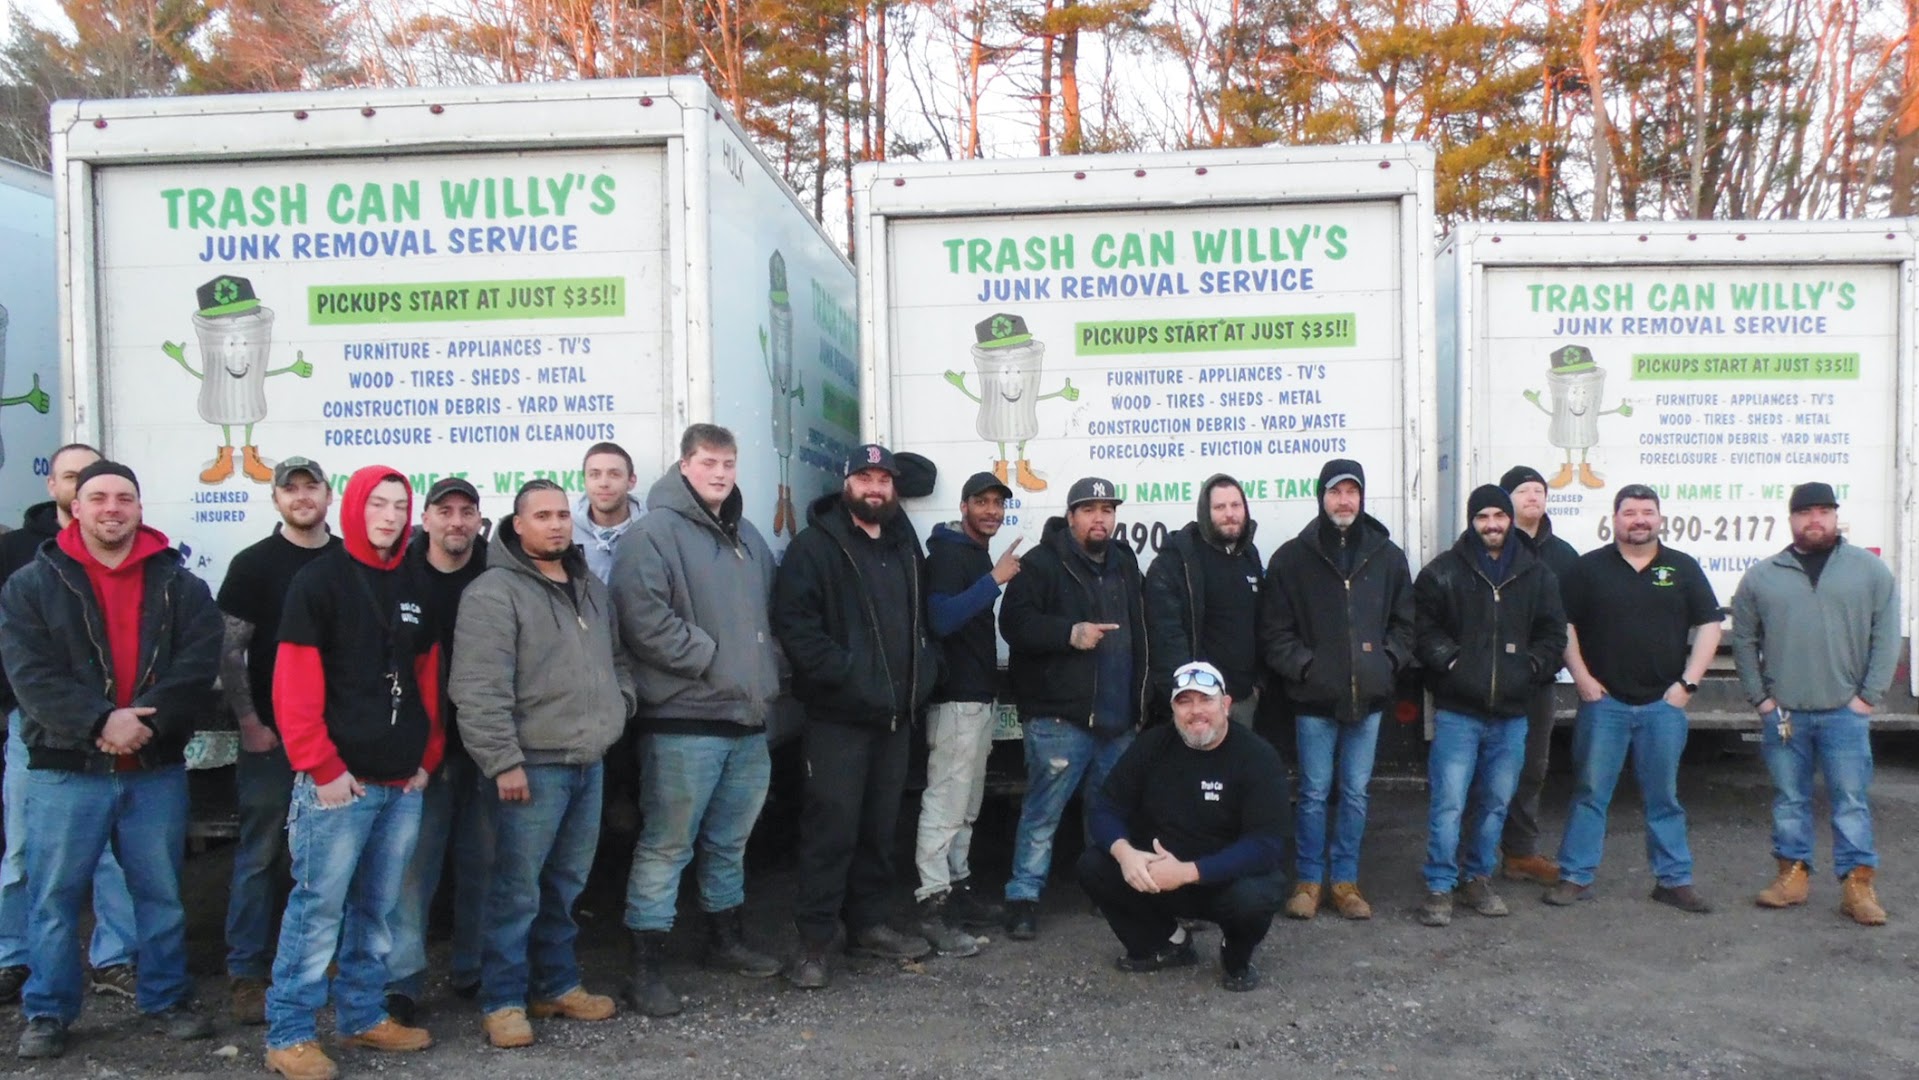 Waste management service In Londonderry NH 